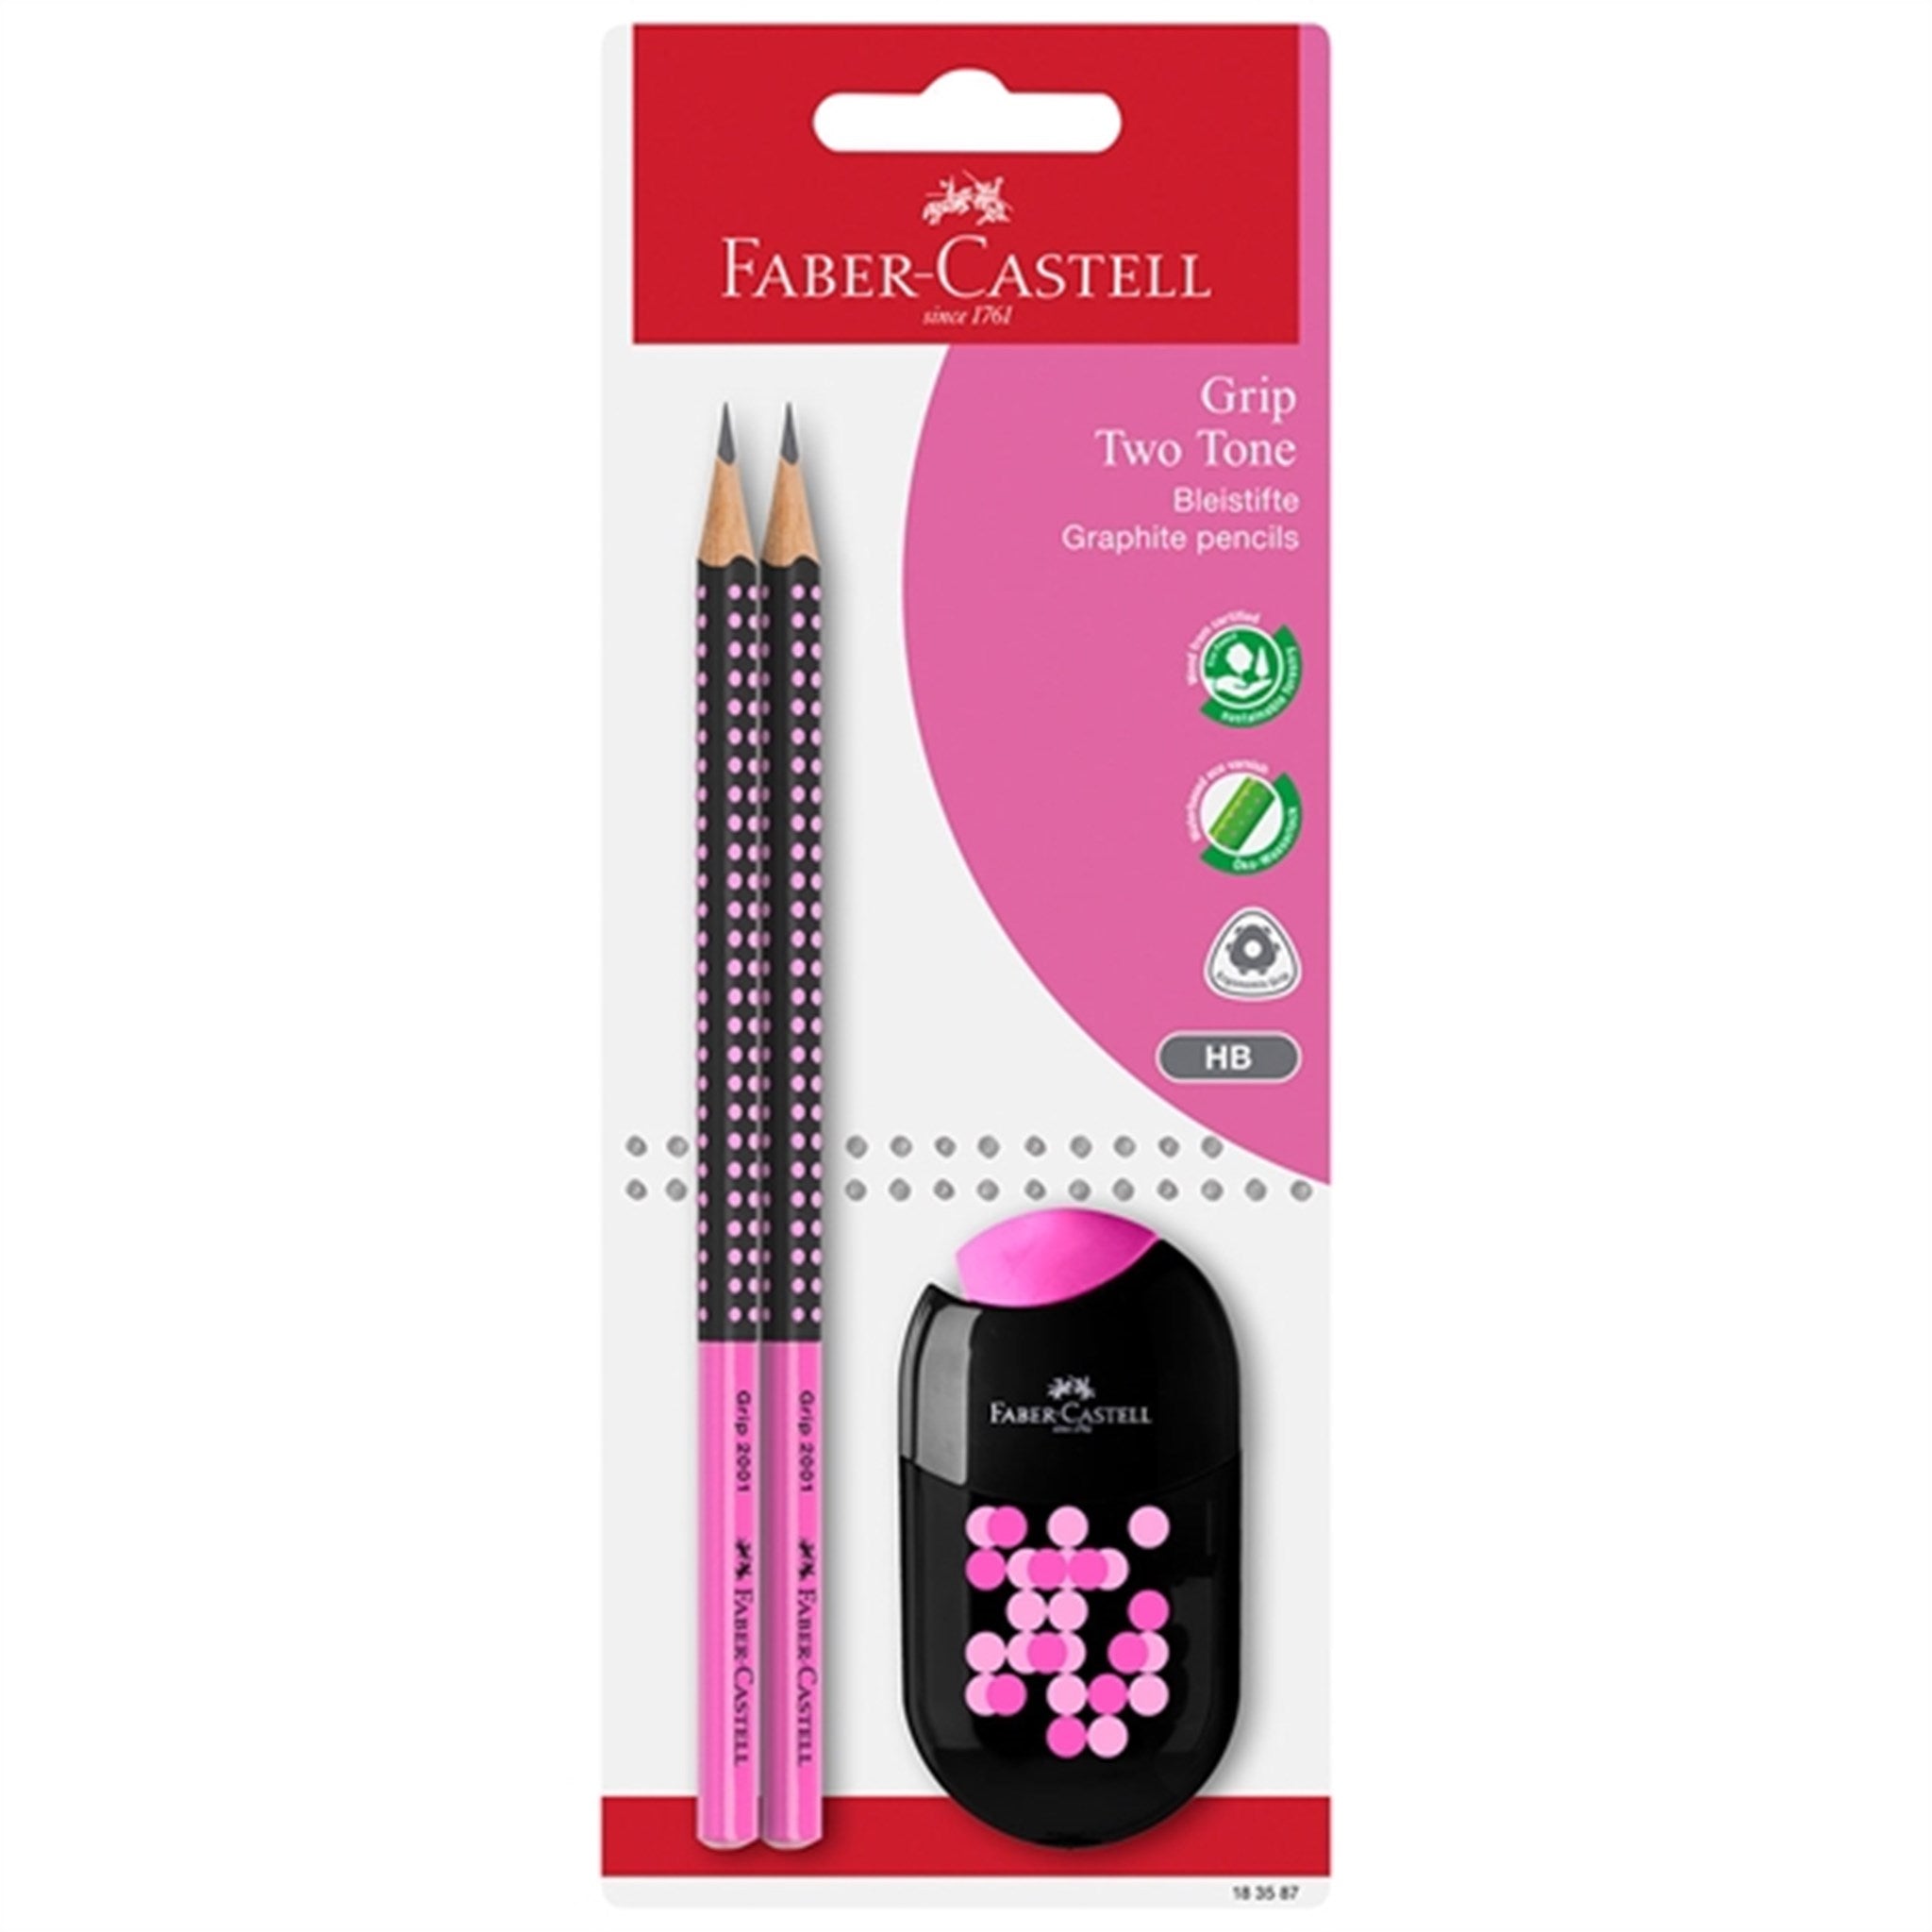 Faber-Castell Grip 2001 Two Tone Pencil, Pencil Sharpener - Pink